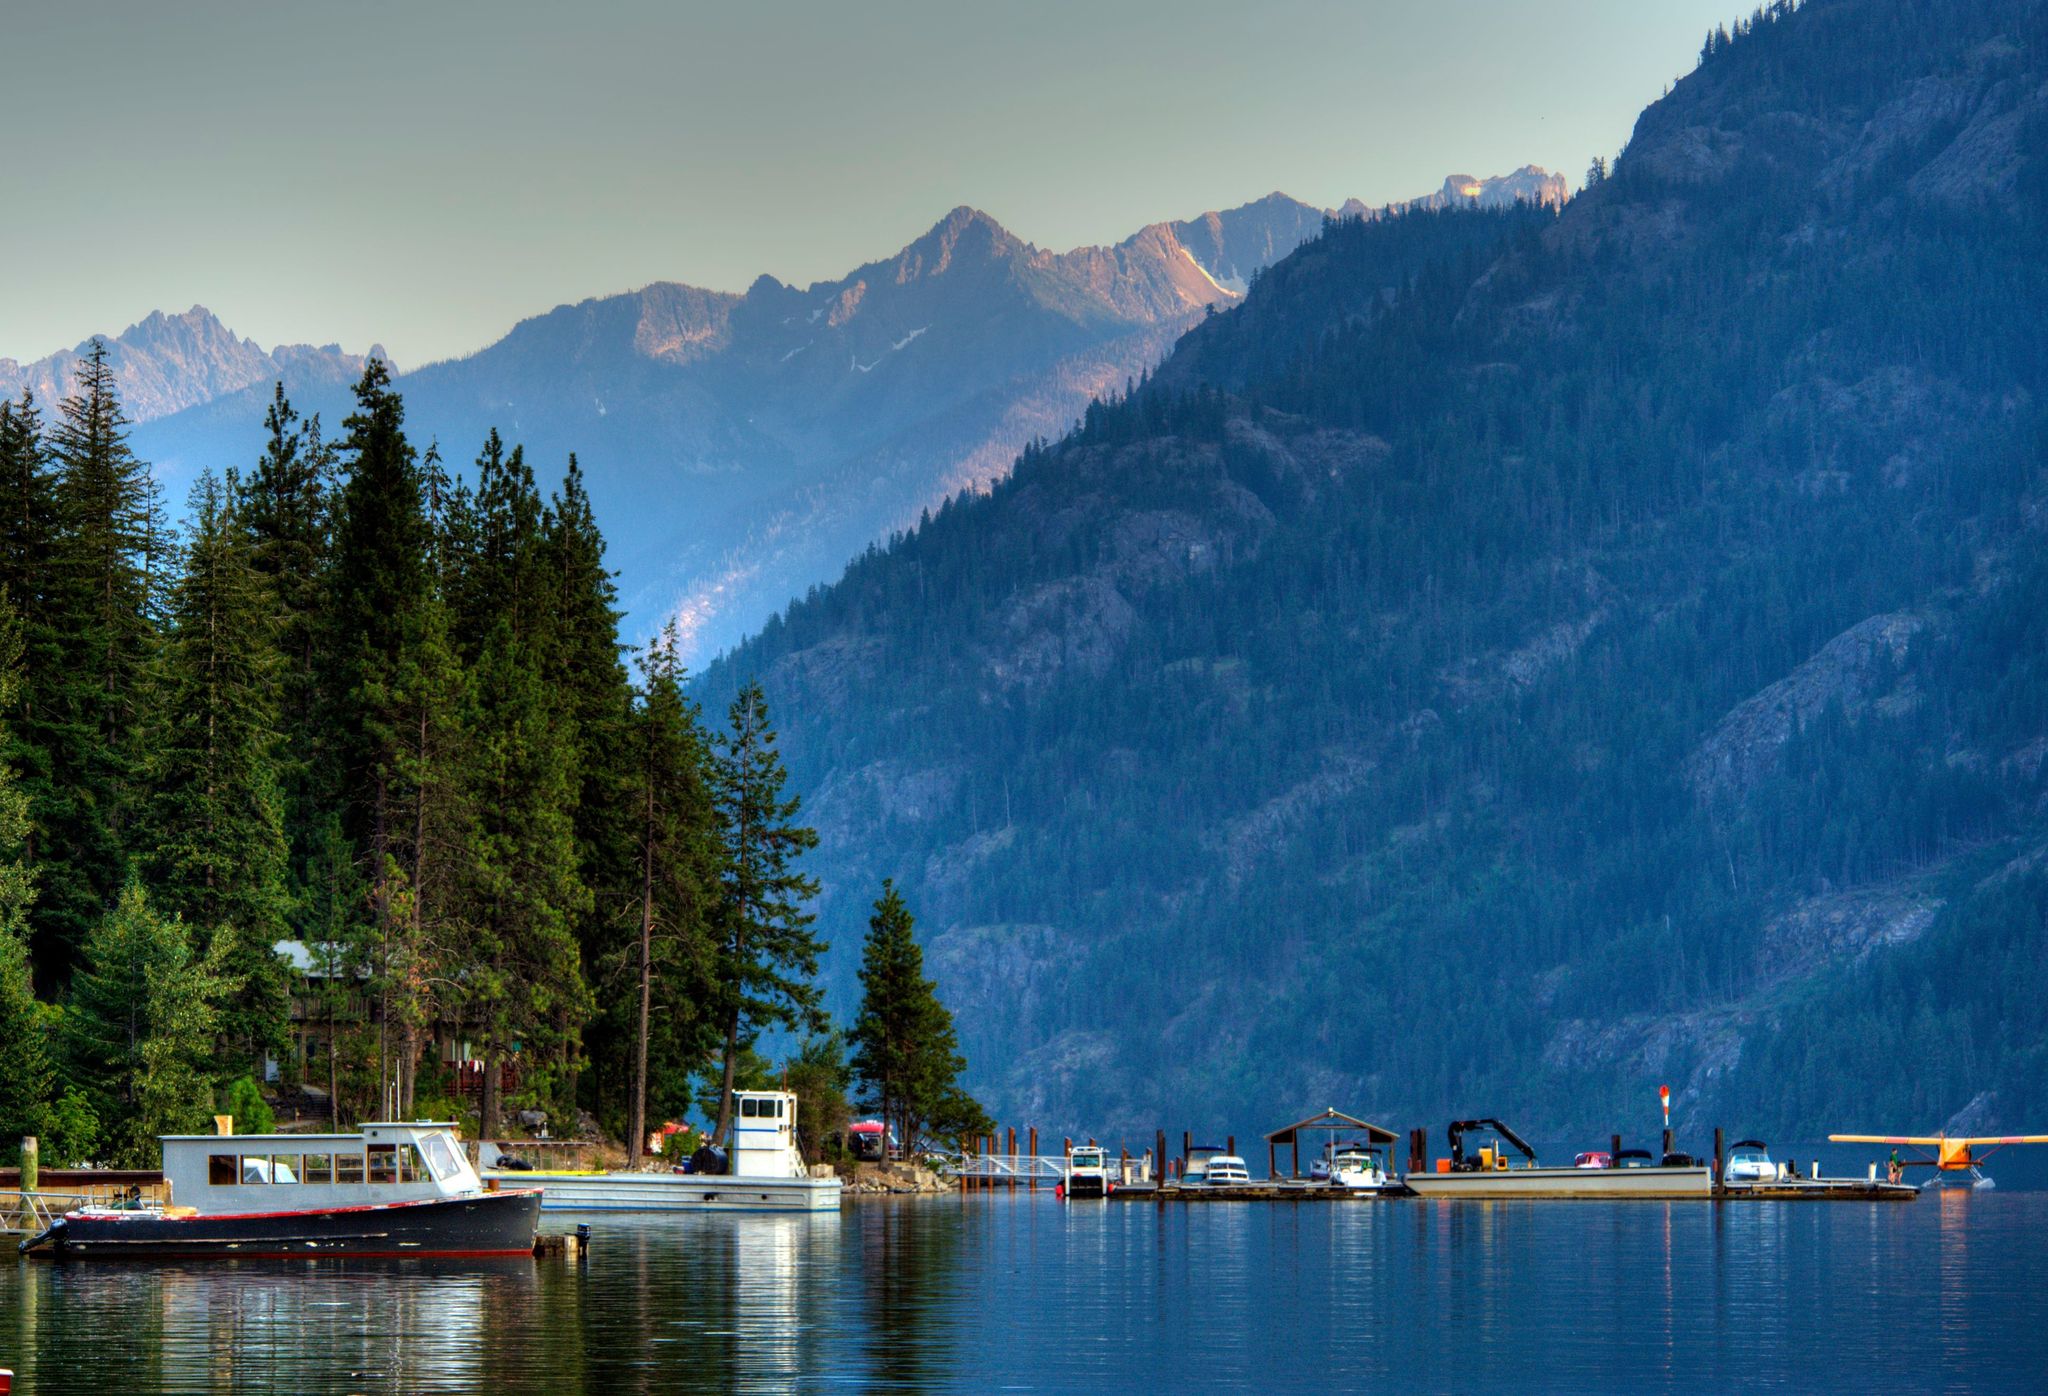 Stehekin sits at the top of Lake Chelan, welcoming visitors to take a life at a slower pace.